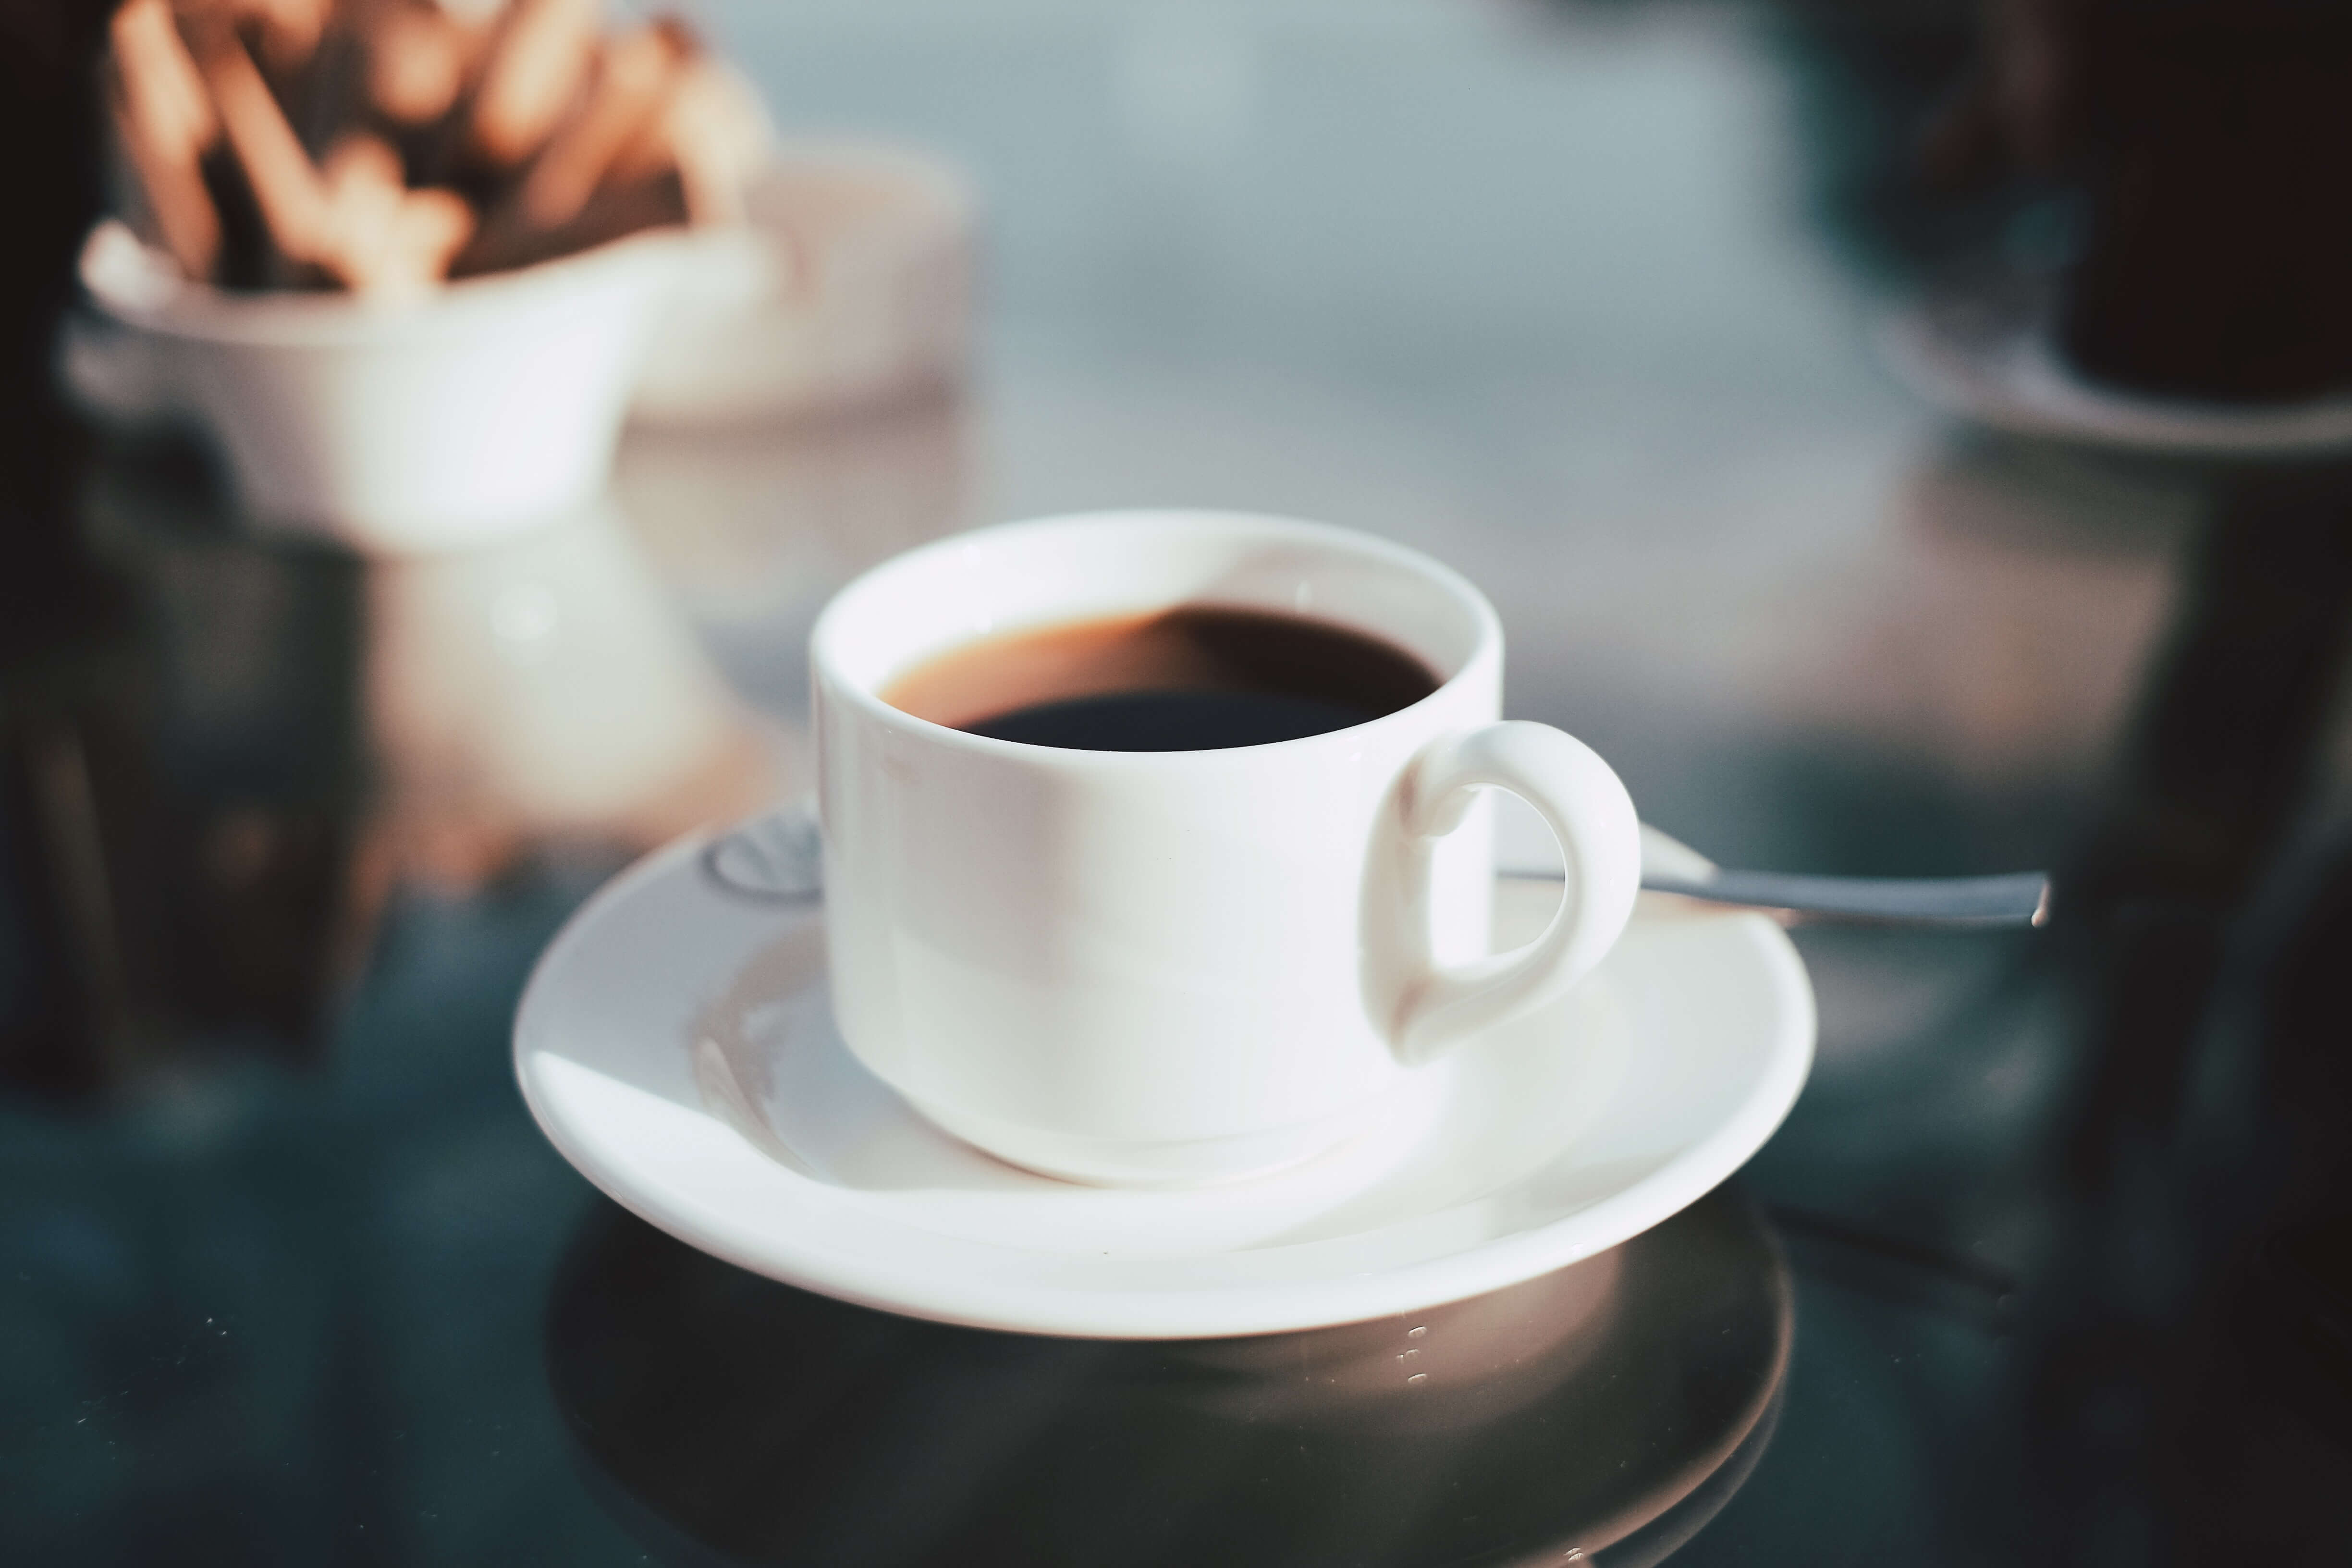 5 Tips to Keep Coffee Hot Without Compromising Taste - Roast Ratings